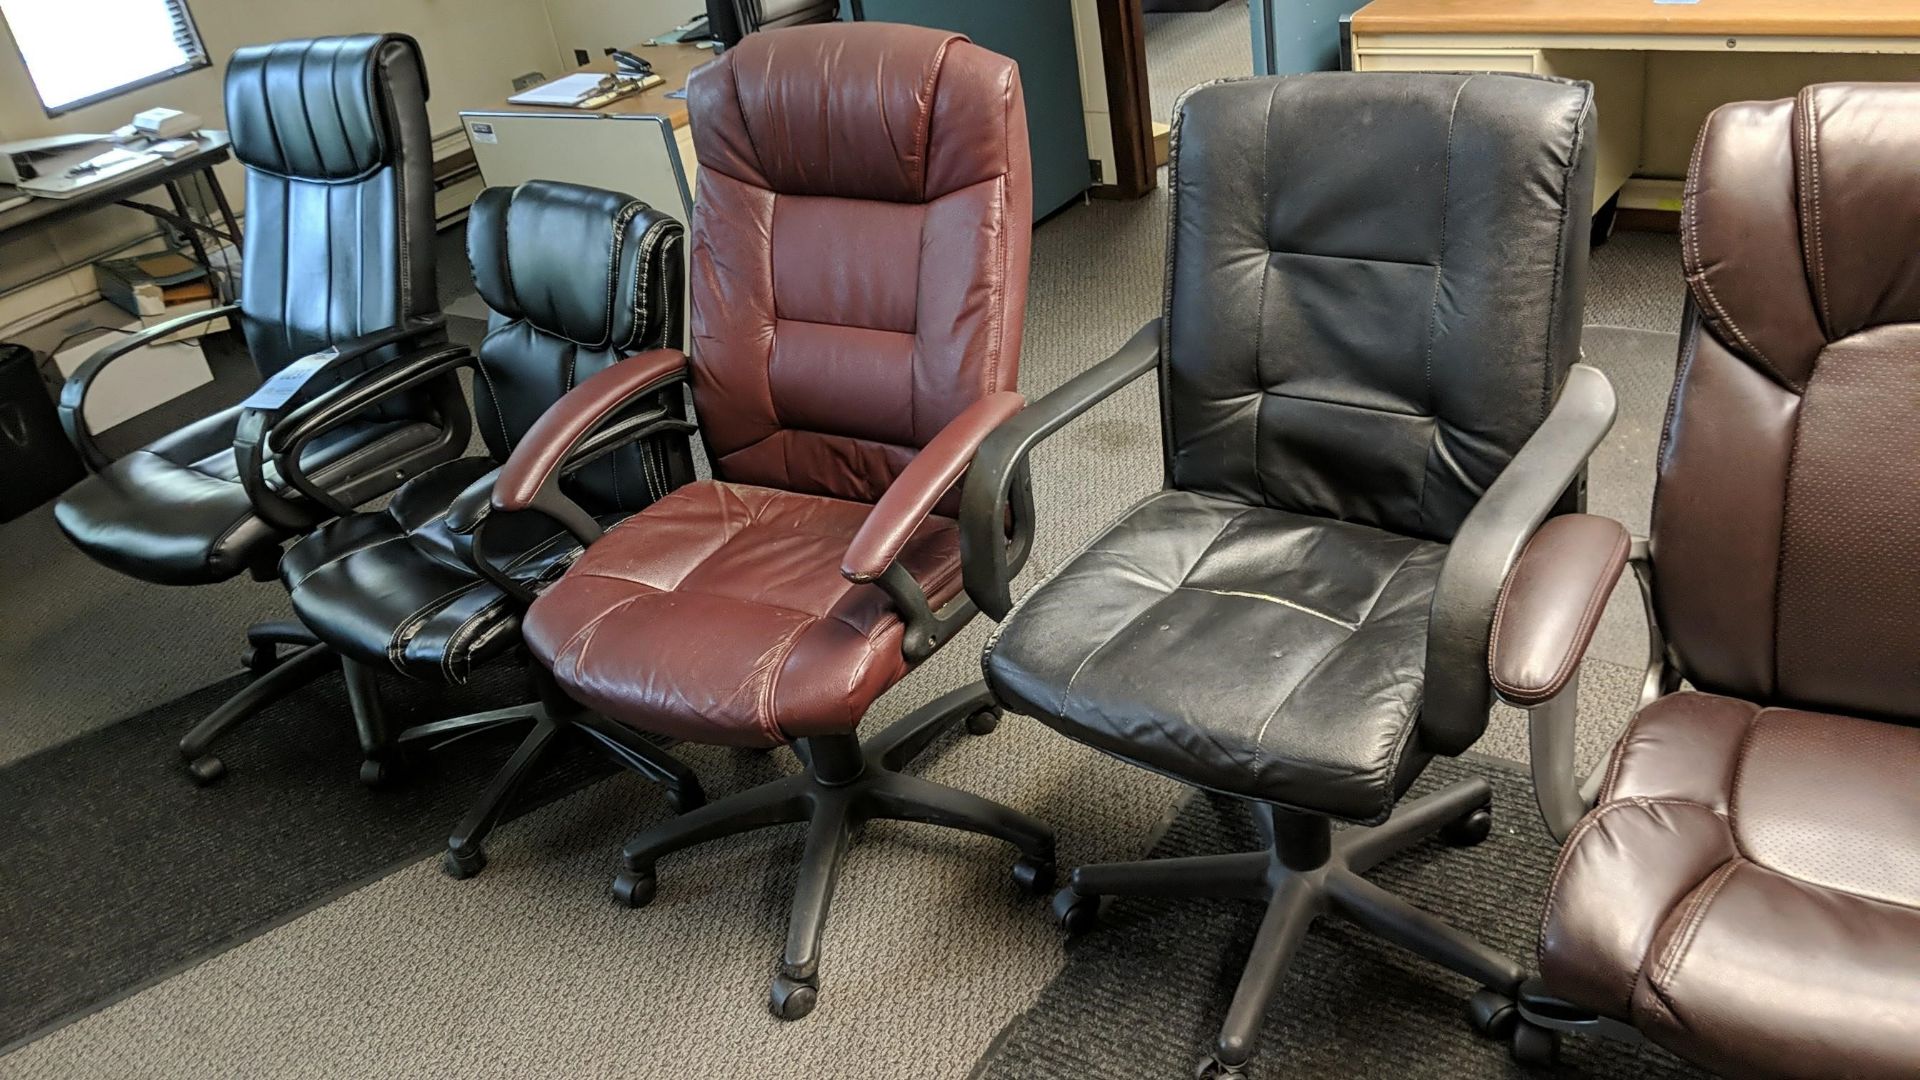 BLACK SWIVEL OFFICE CHAIRS - Image 2 of 2